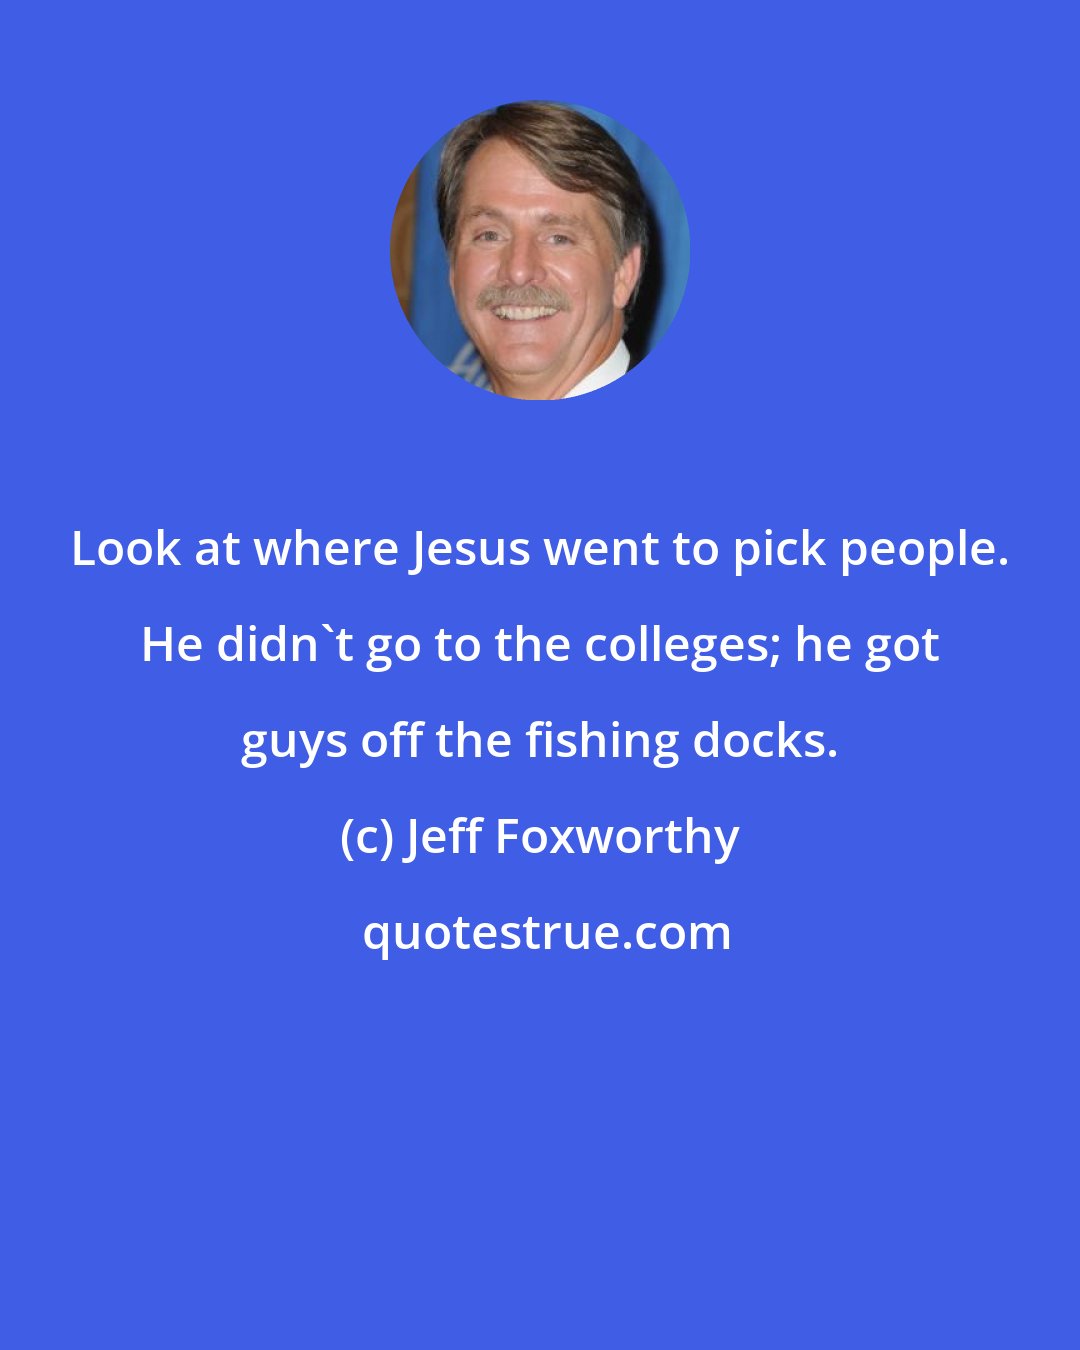 Jeff Foxworthy: Look at where Jesus went to pick people. He didn't go to the colleges; he got guys off the fishing docks.